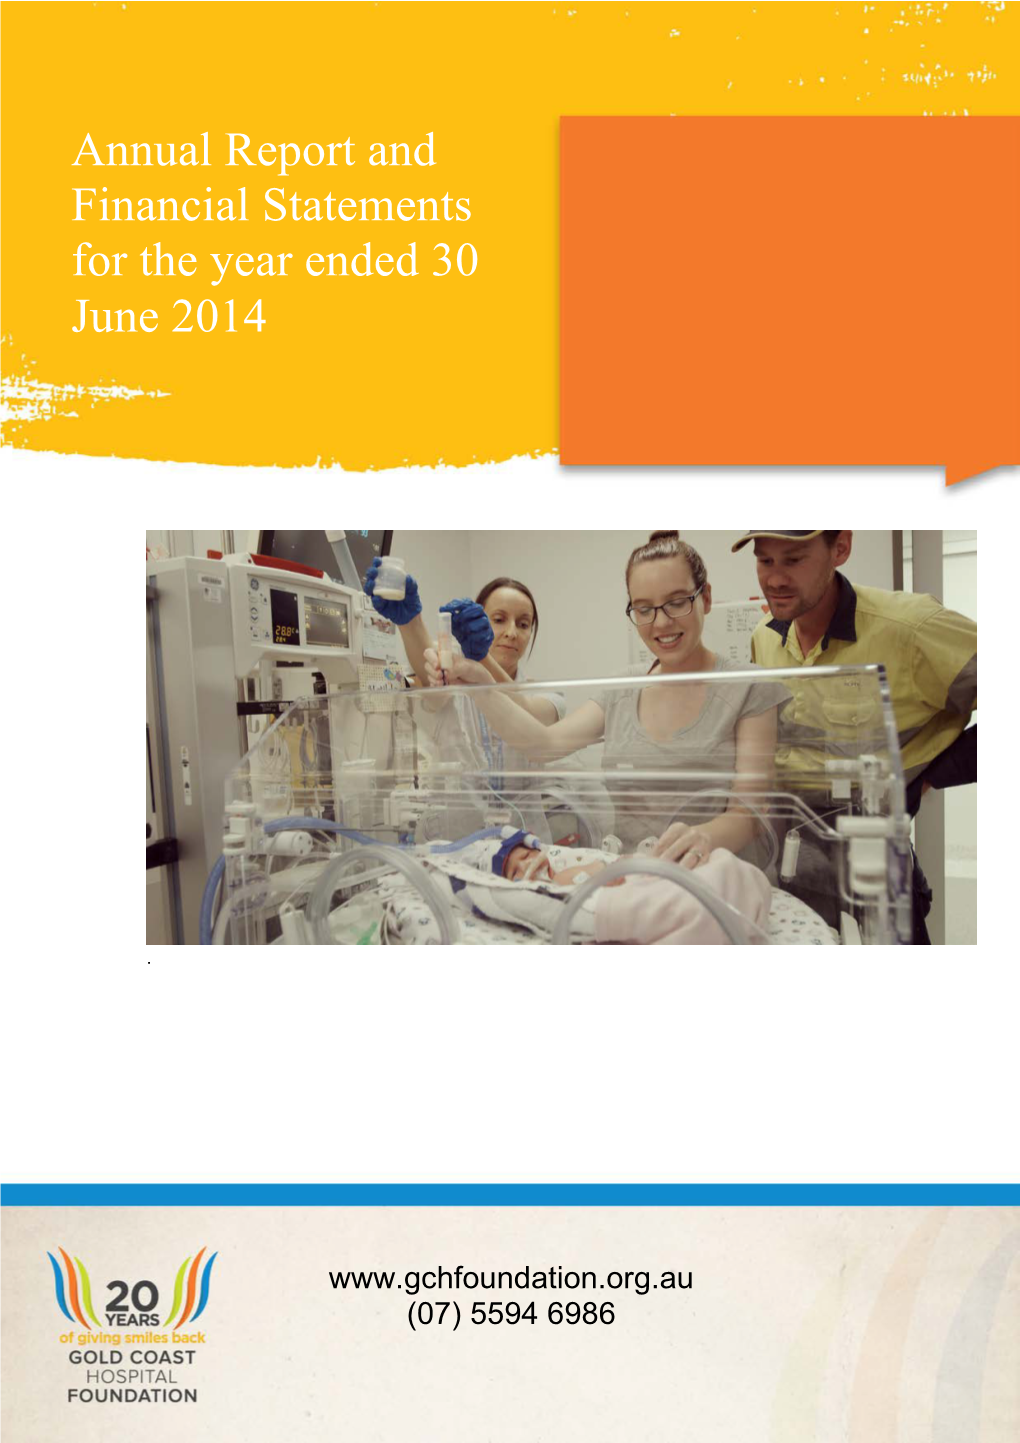 Annual Report and Financial Statements for the Year Ended 30 June 2014